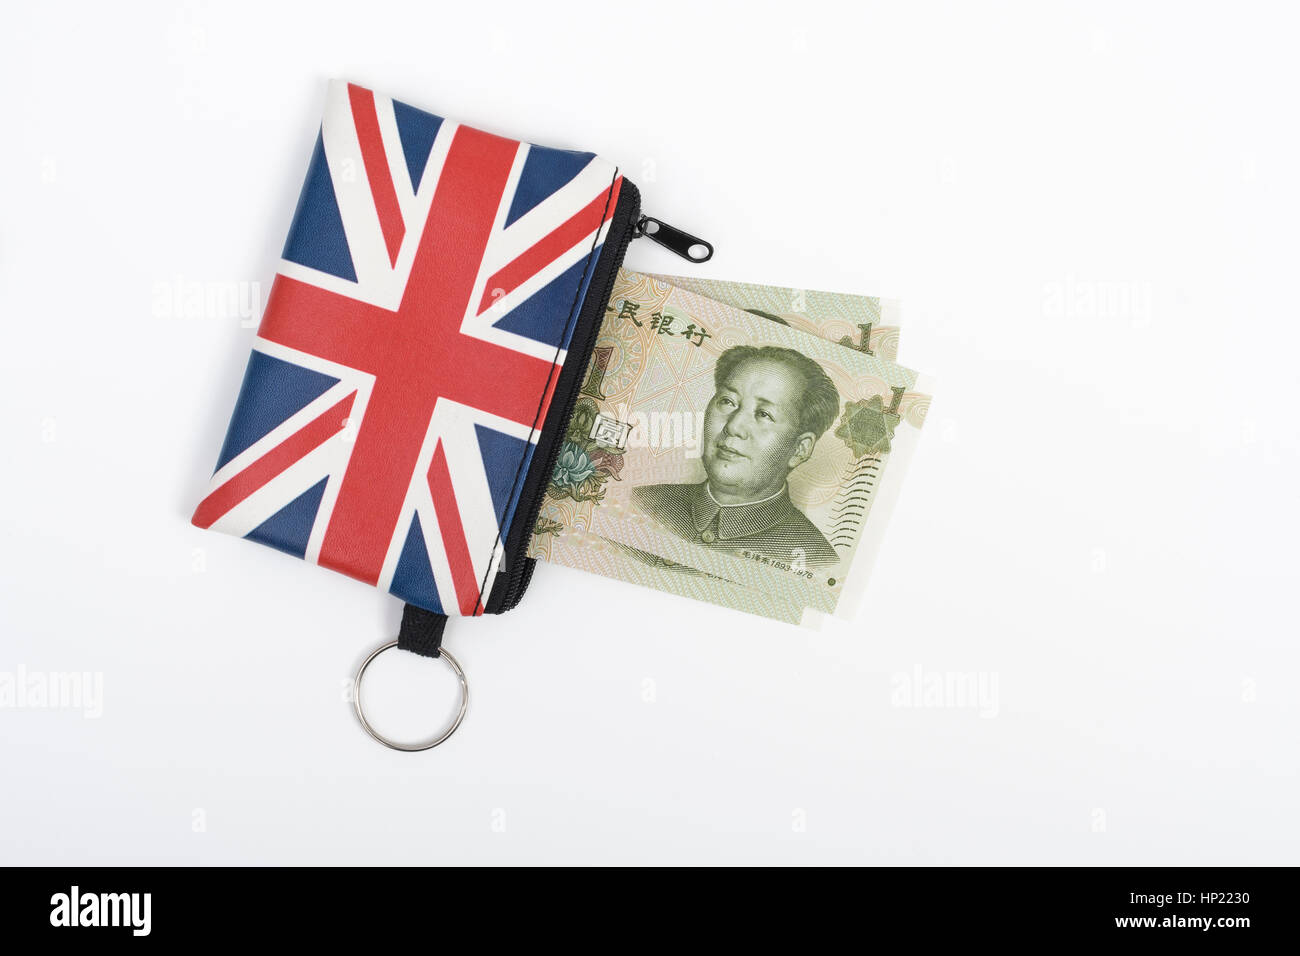 Union Jack coin purse with Chinese 1 Yuan banknotes - as metaphor for Yuan / Renminbi-Sterling exchange rate. Stock Photo